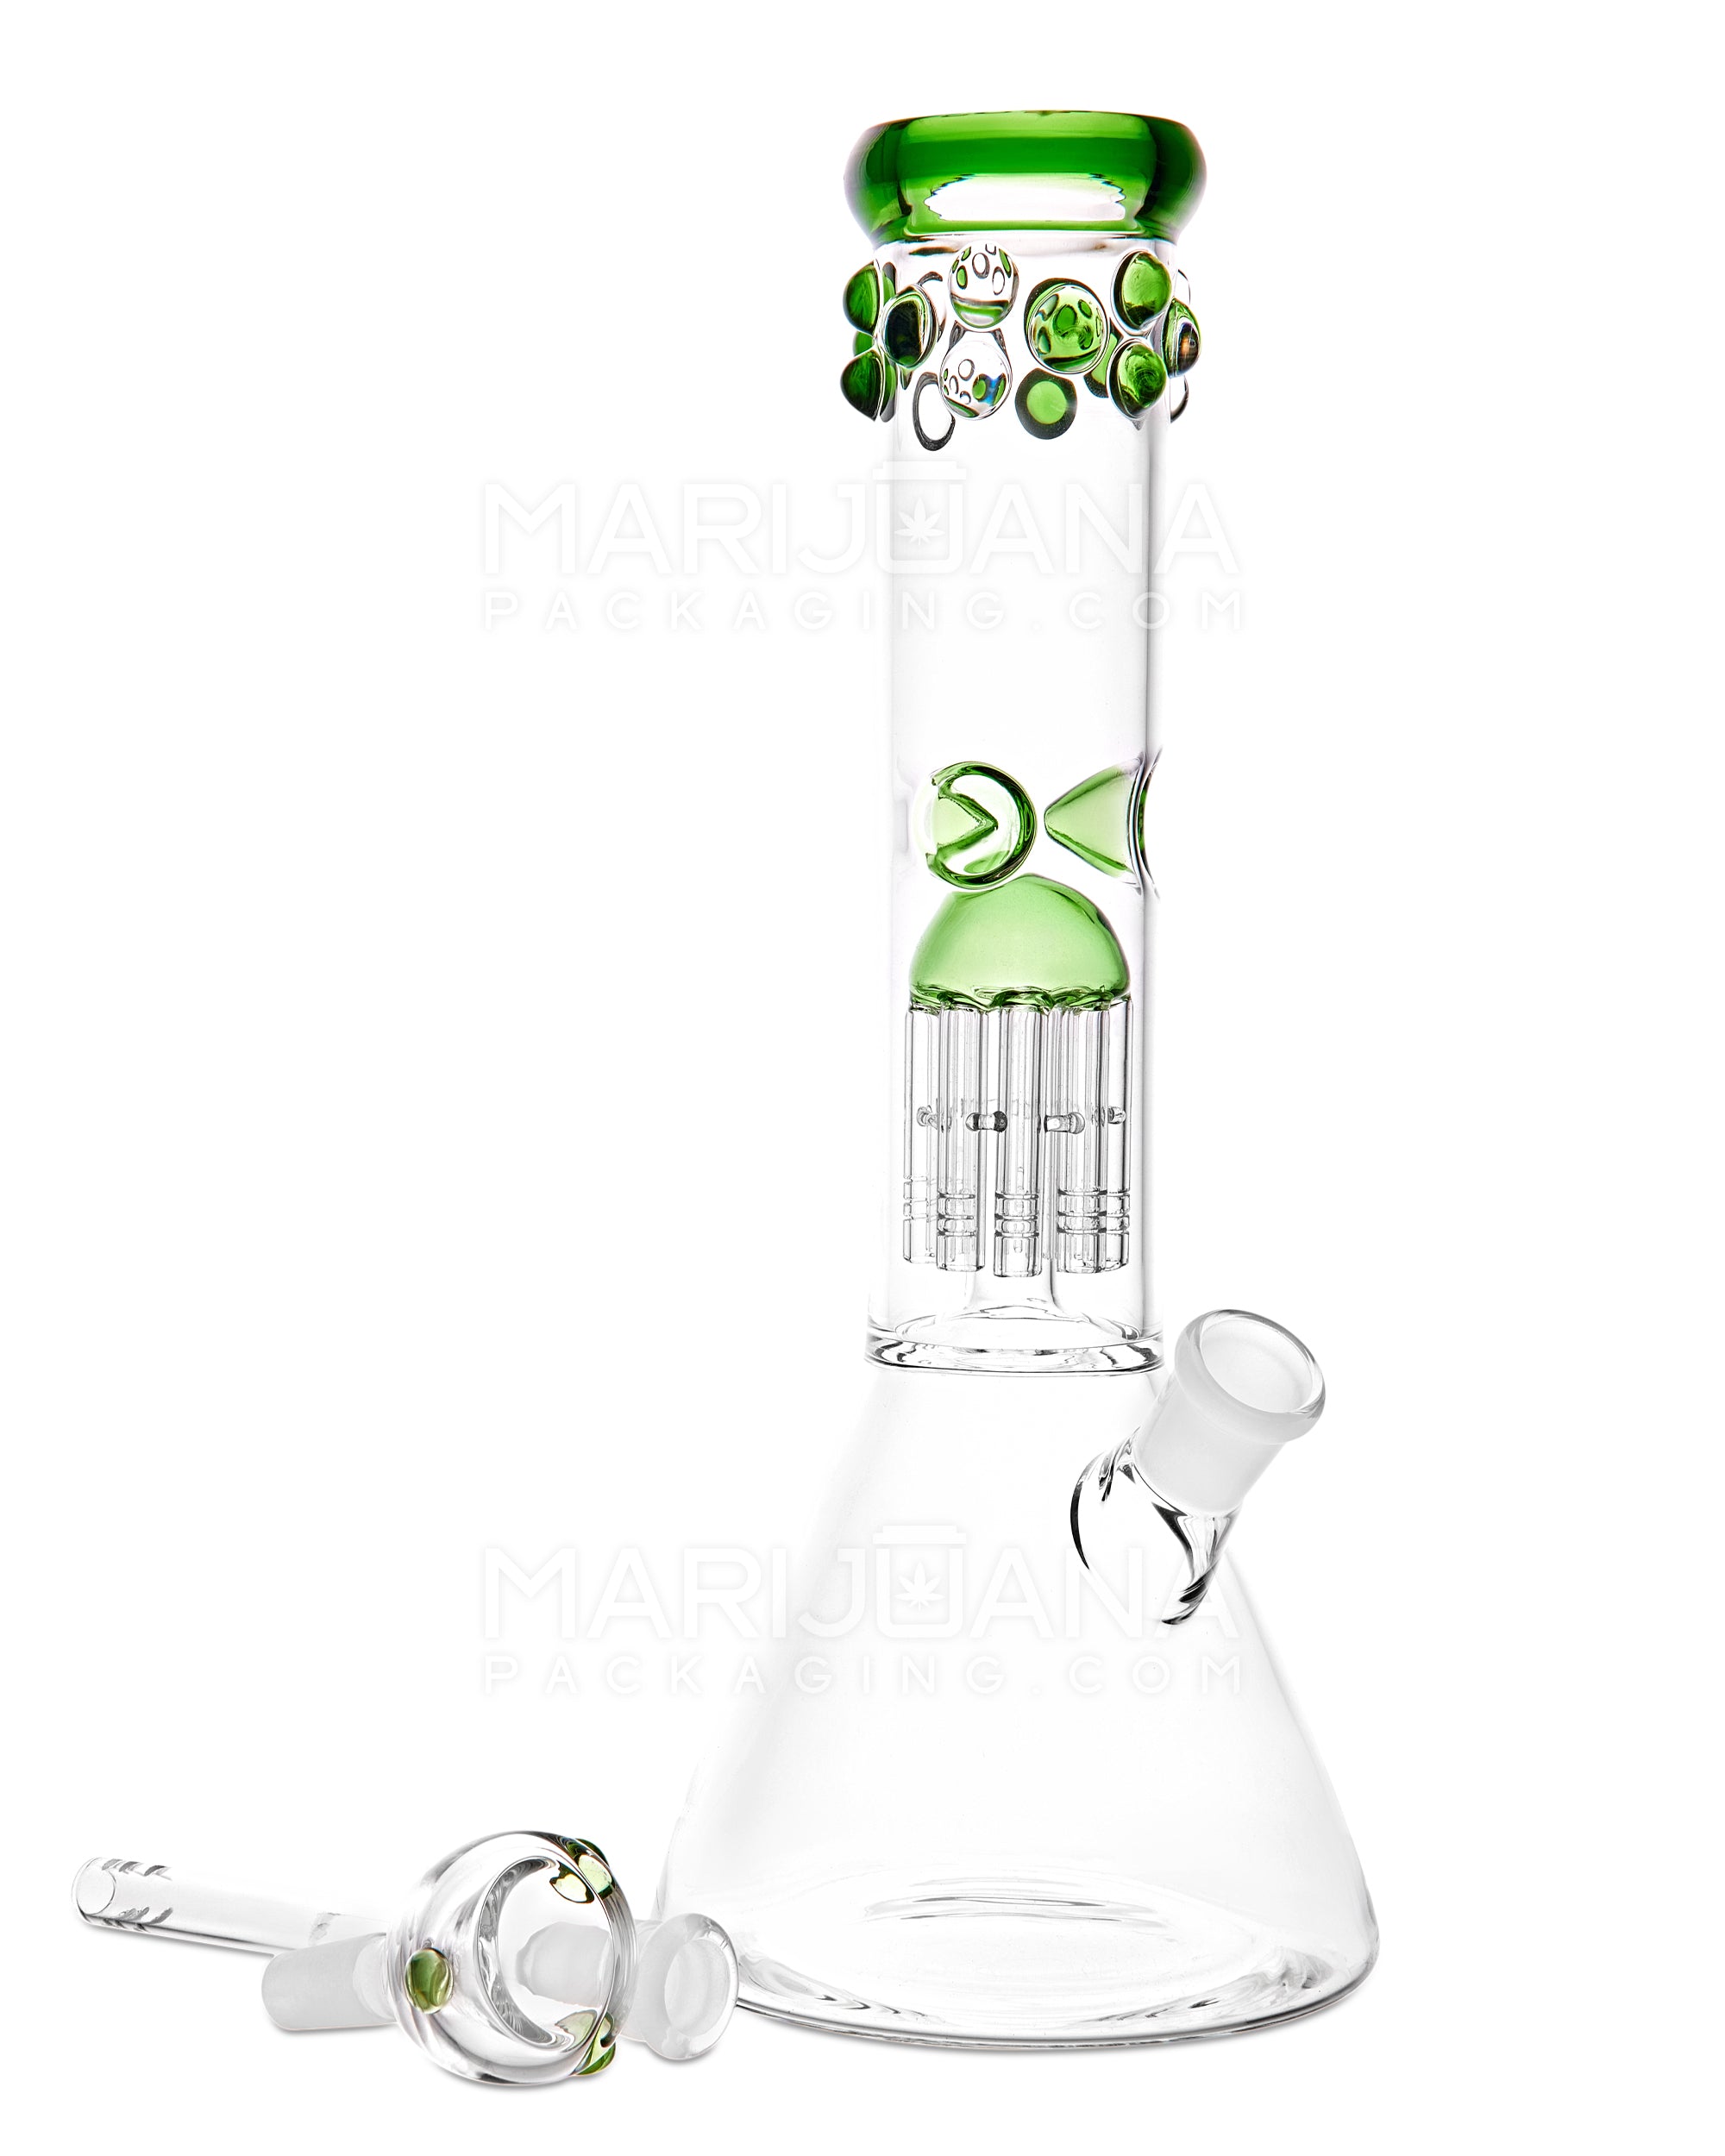 Straight Neck Tree Perc Thick Glass Beaker Water Pipe w/ Ice Catcher | 12in Tall - 14mm Bowl - Green - 2